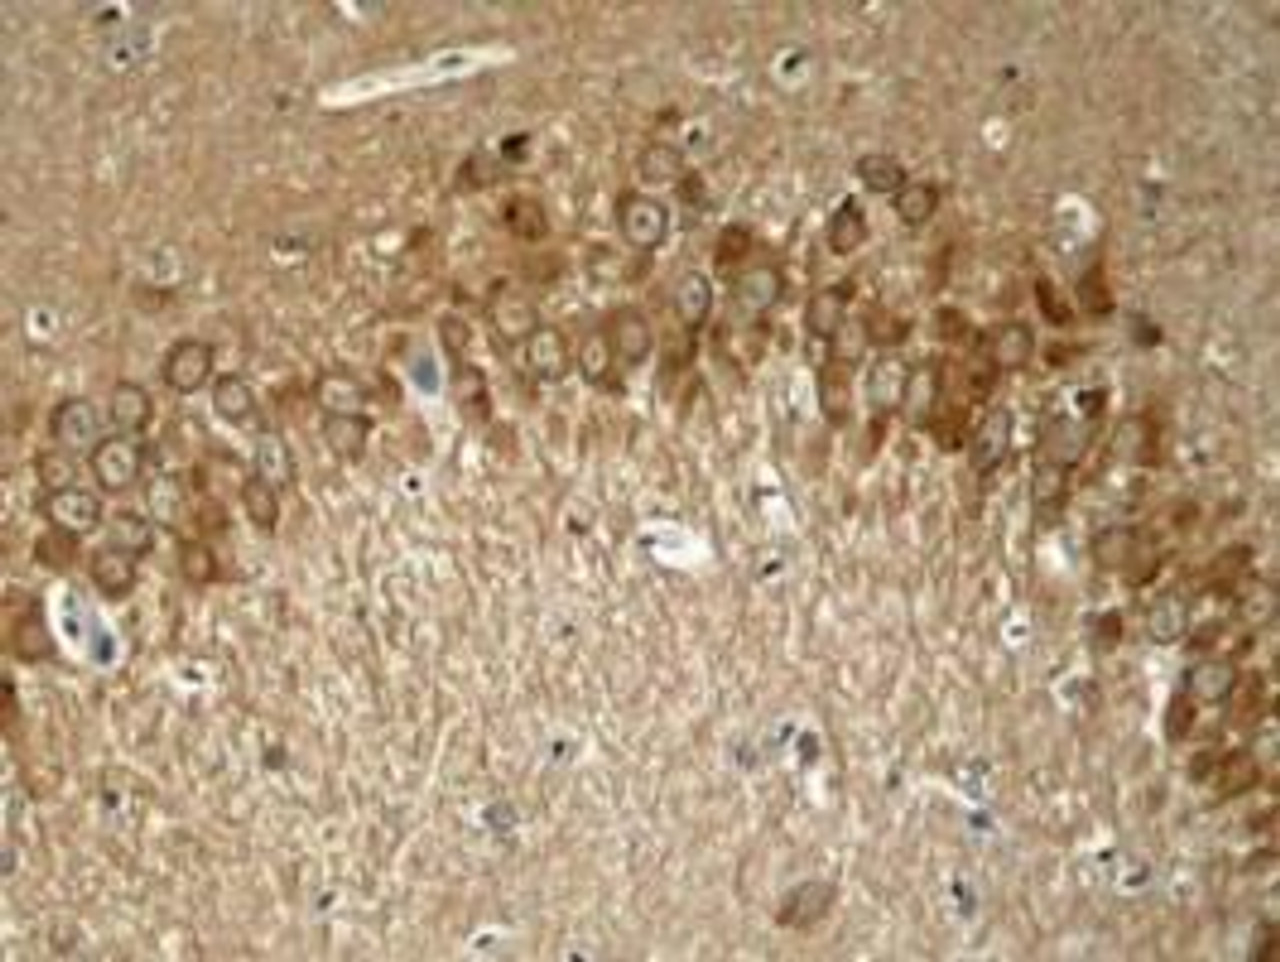 Immunohistochemical analysis of paraffin-embedded rat hippocampal region tissue from a model with Alzheimer’s Disease using Tau (Phospho-Thr181) .